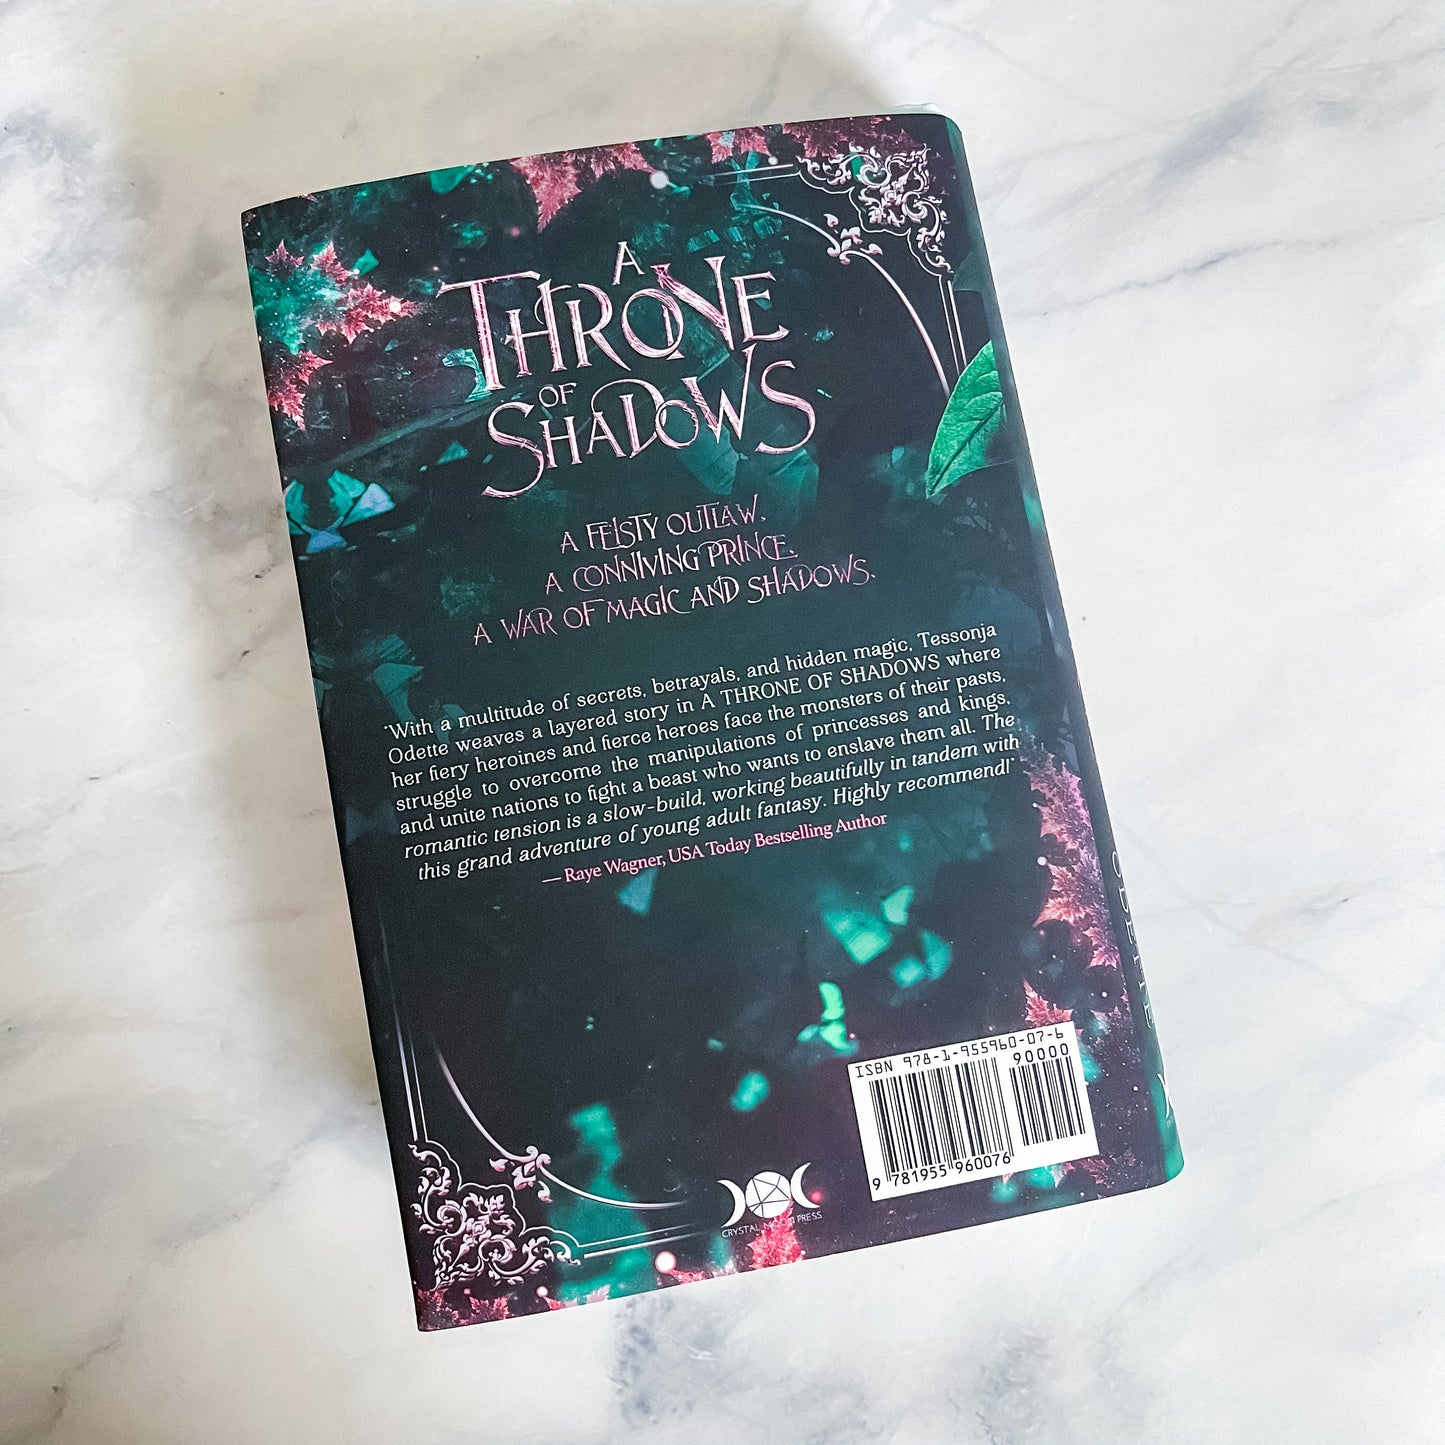 A Throne of Shadows (hardcover) signed